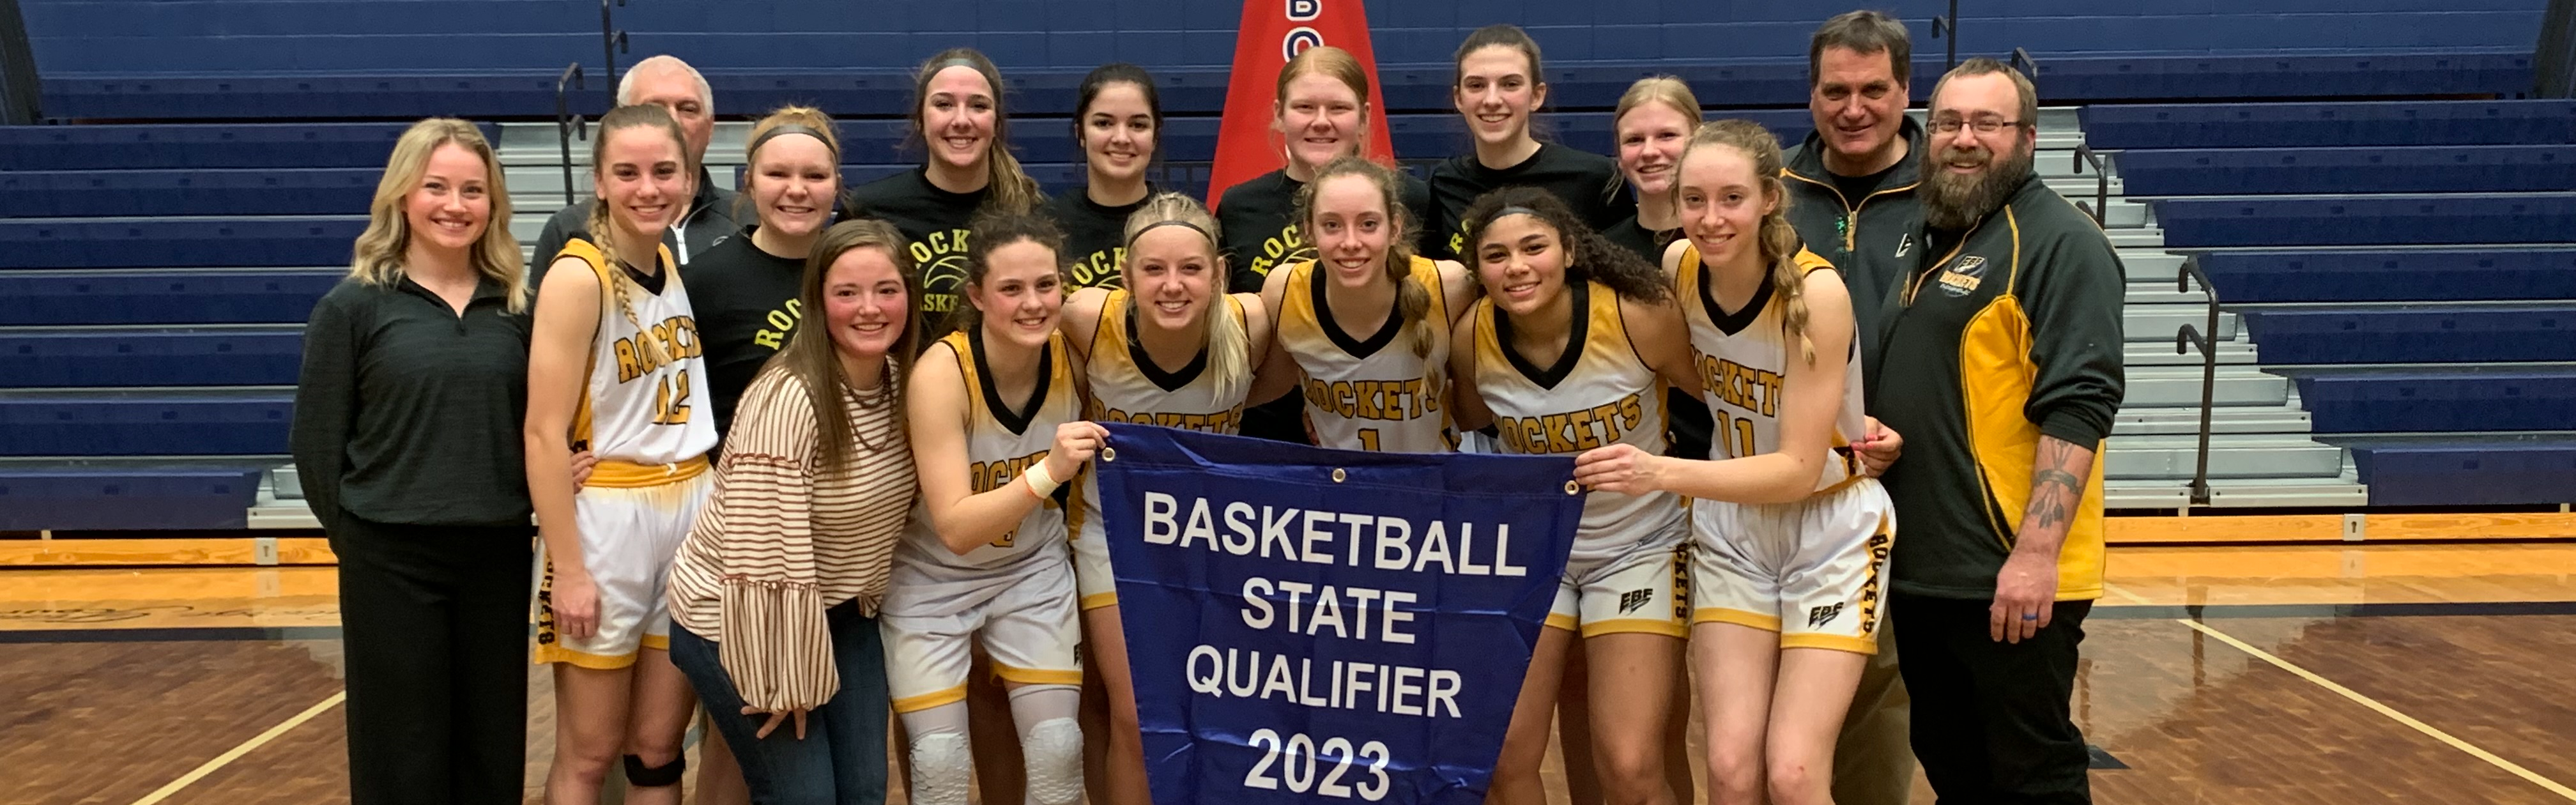 Picture of the state qualifying EBF girls basketball team with their banner